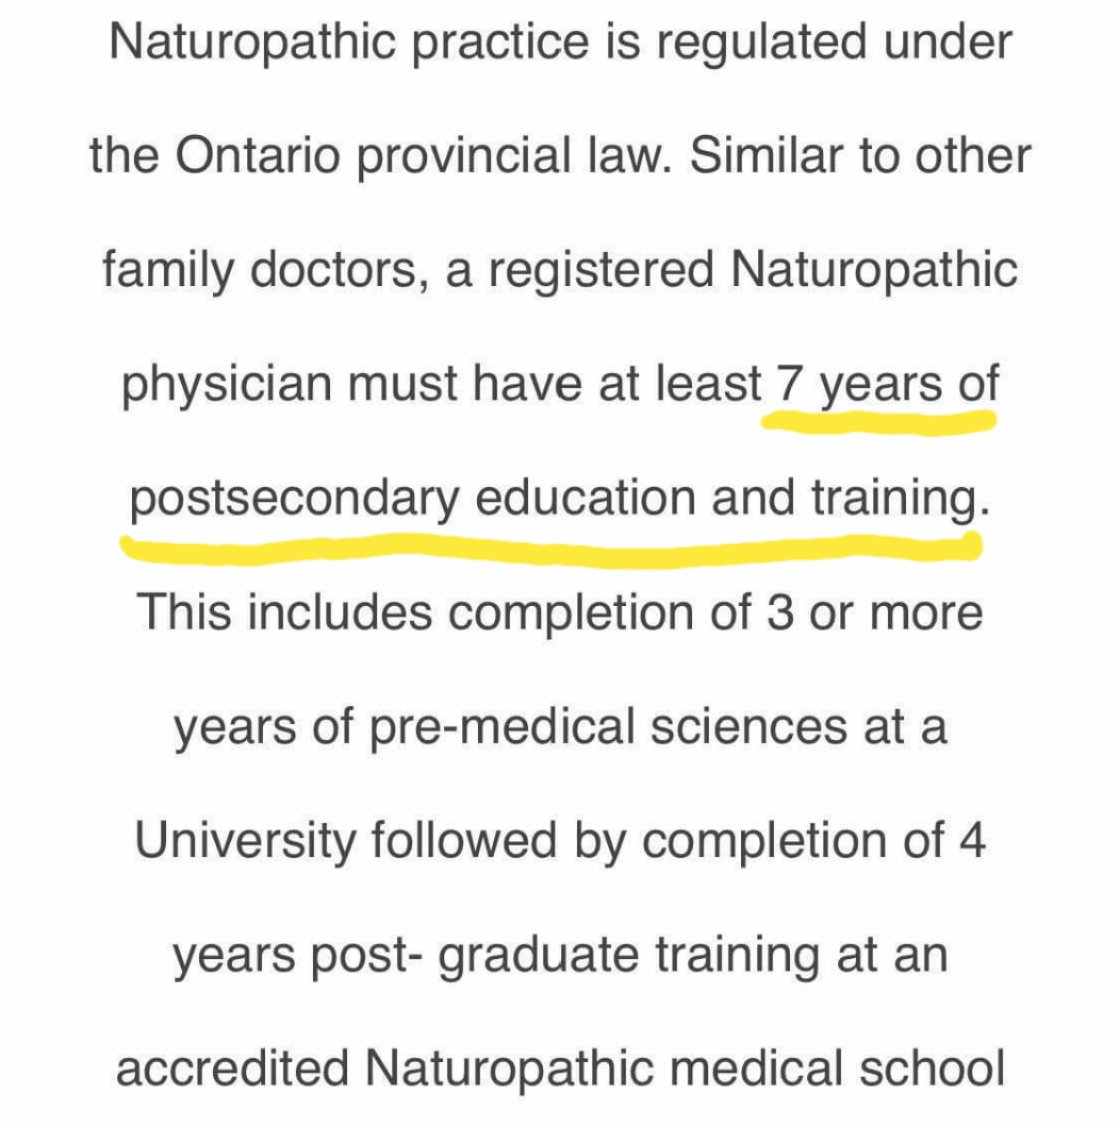 1) Universally, when describing their education, NDs include undergrad. It's a trick to artificially inflate the number of yrs of training, but your bachelor's degree is not part of your training as a health care provider. This is sneaky and deceptive.